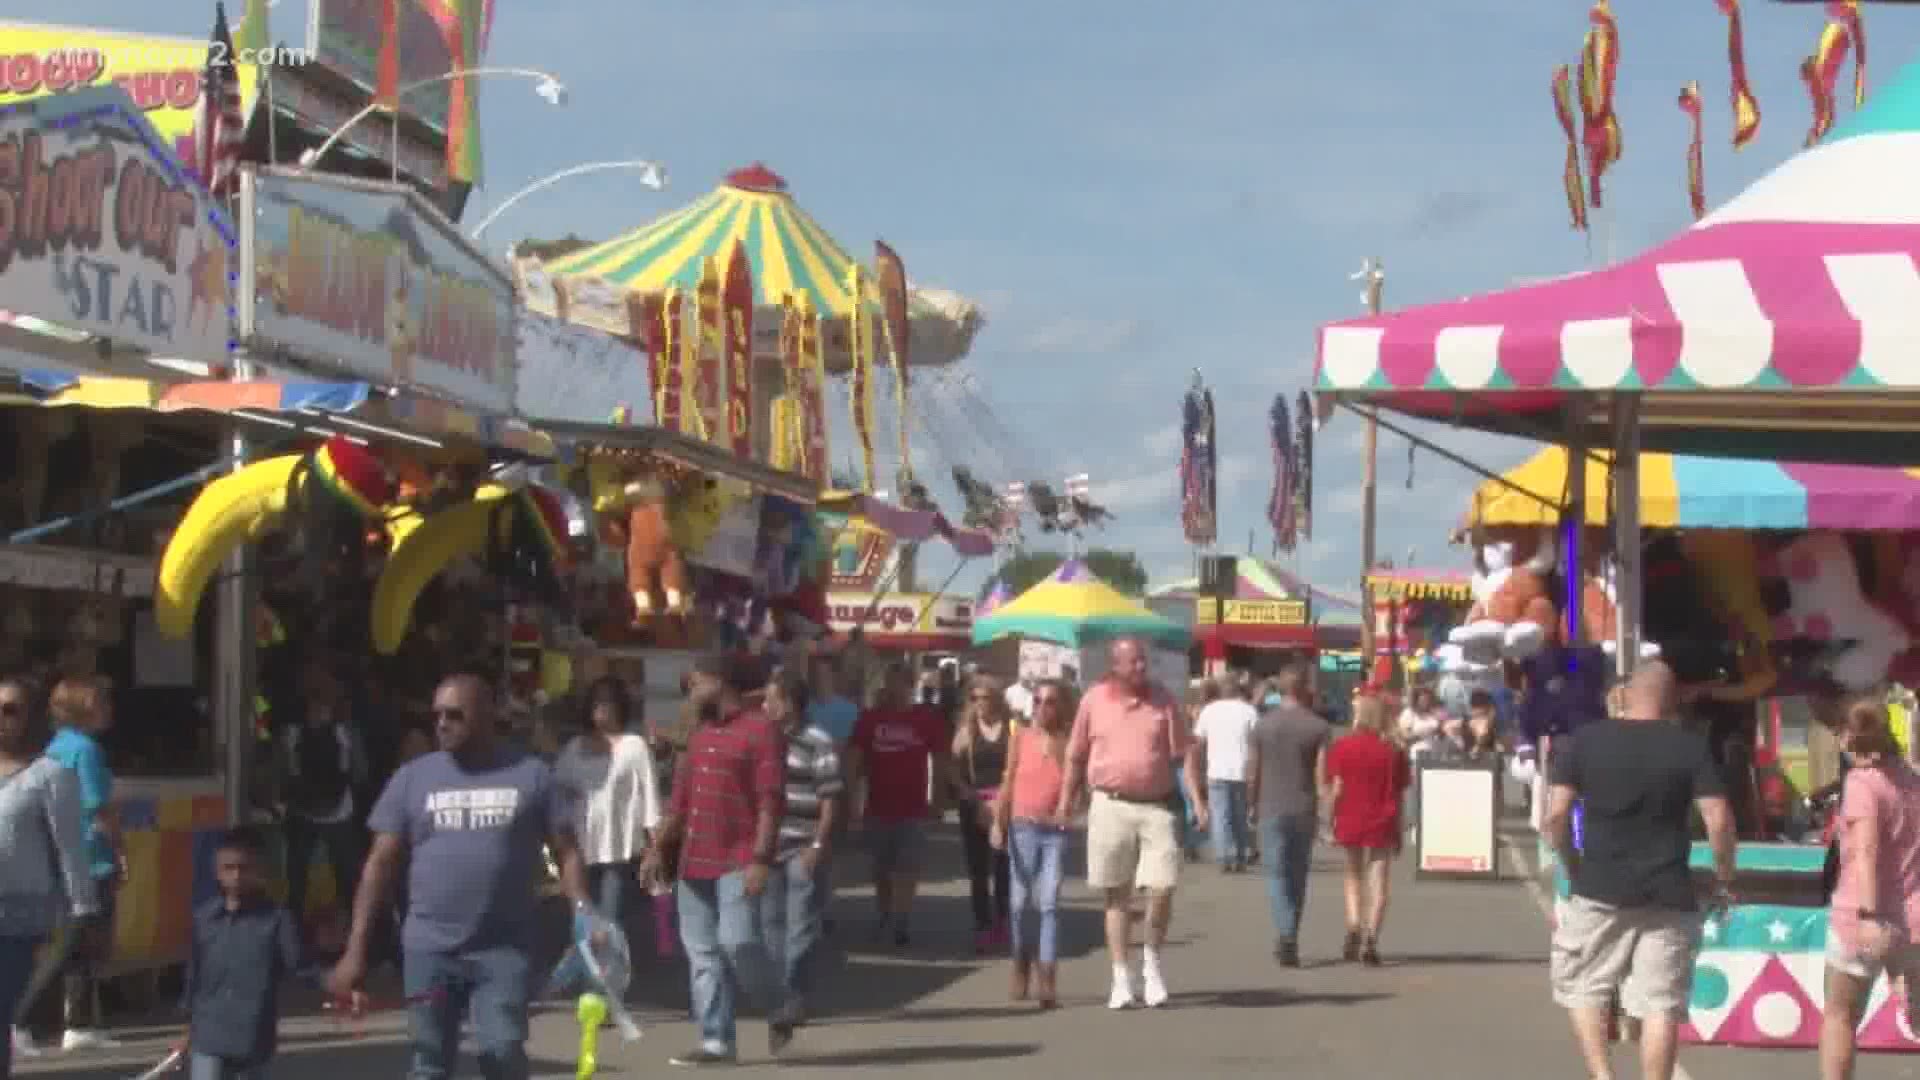 The recently renamed fair will no longer happen in 2020 due to the coronavirus pandemic.